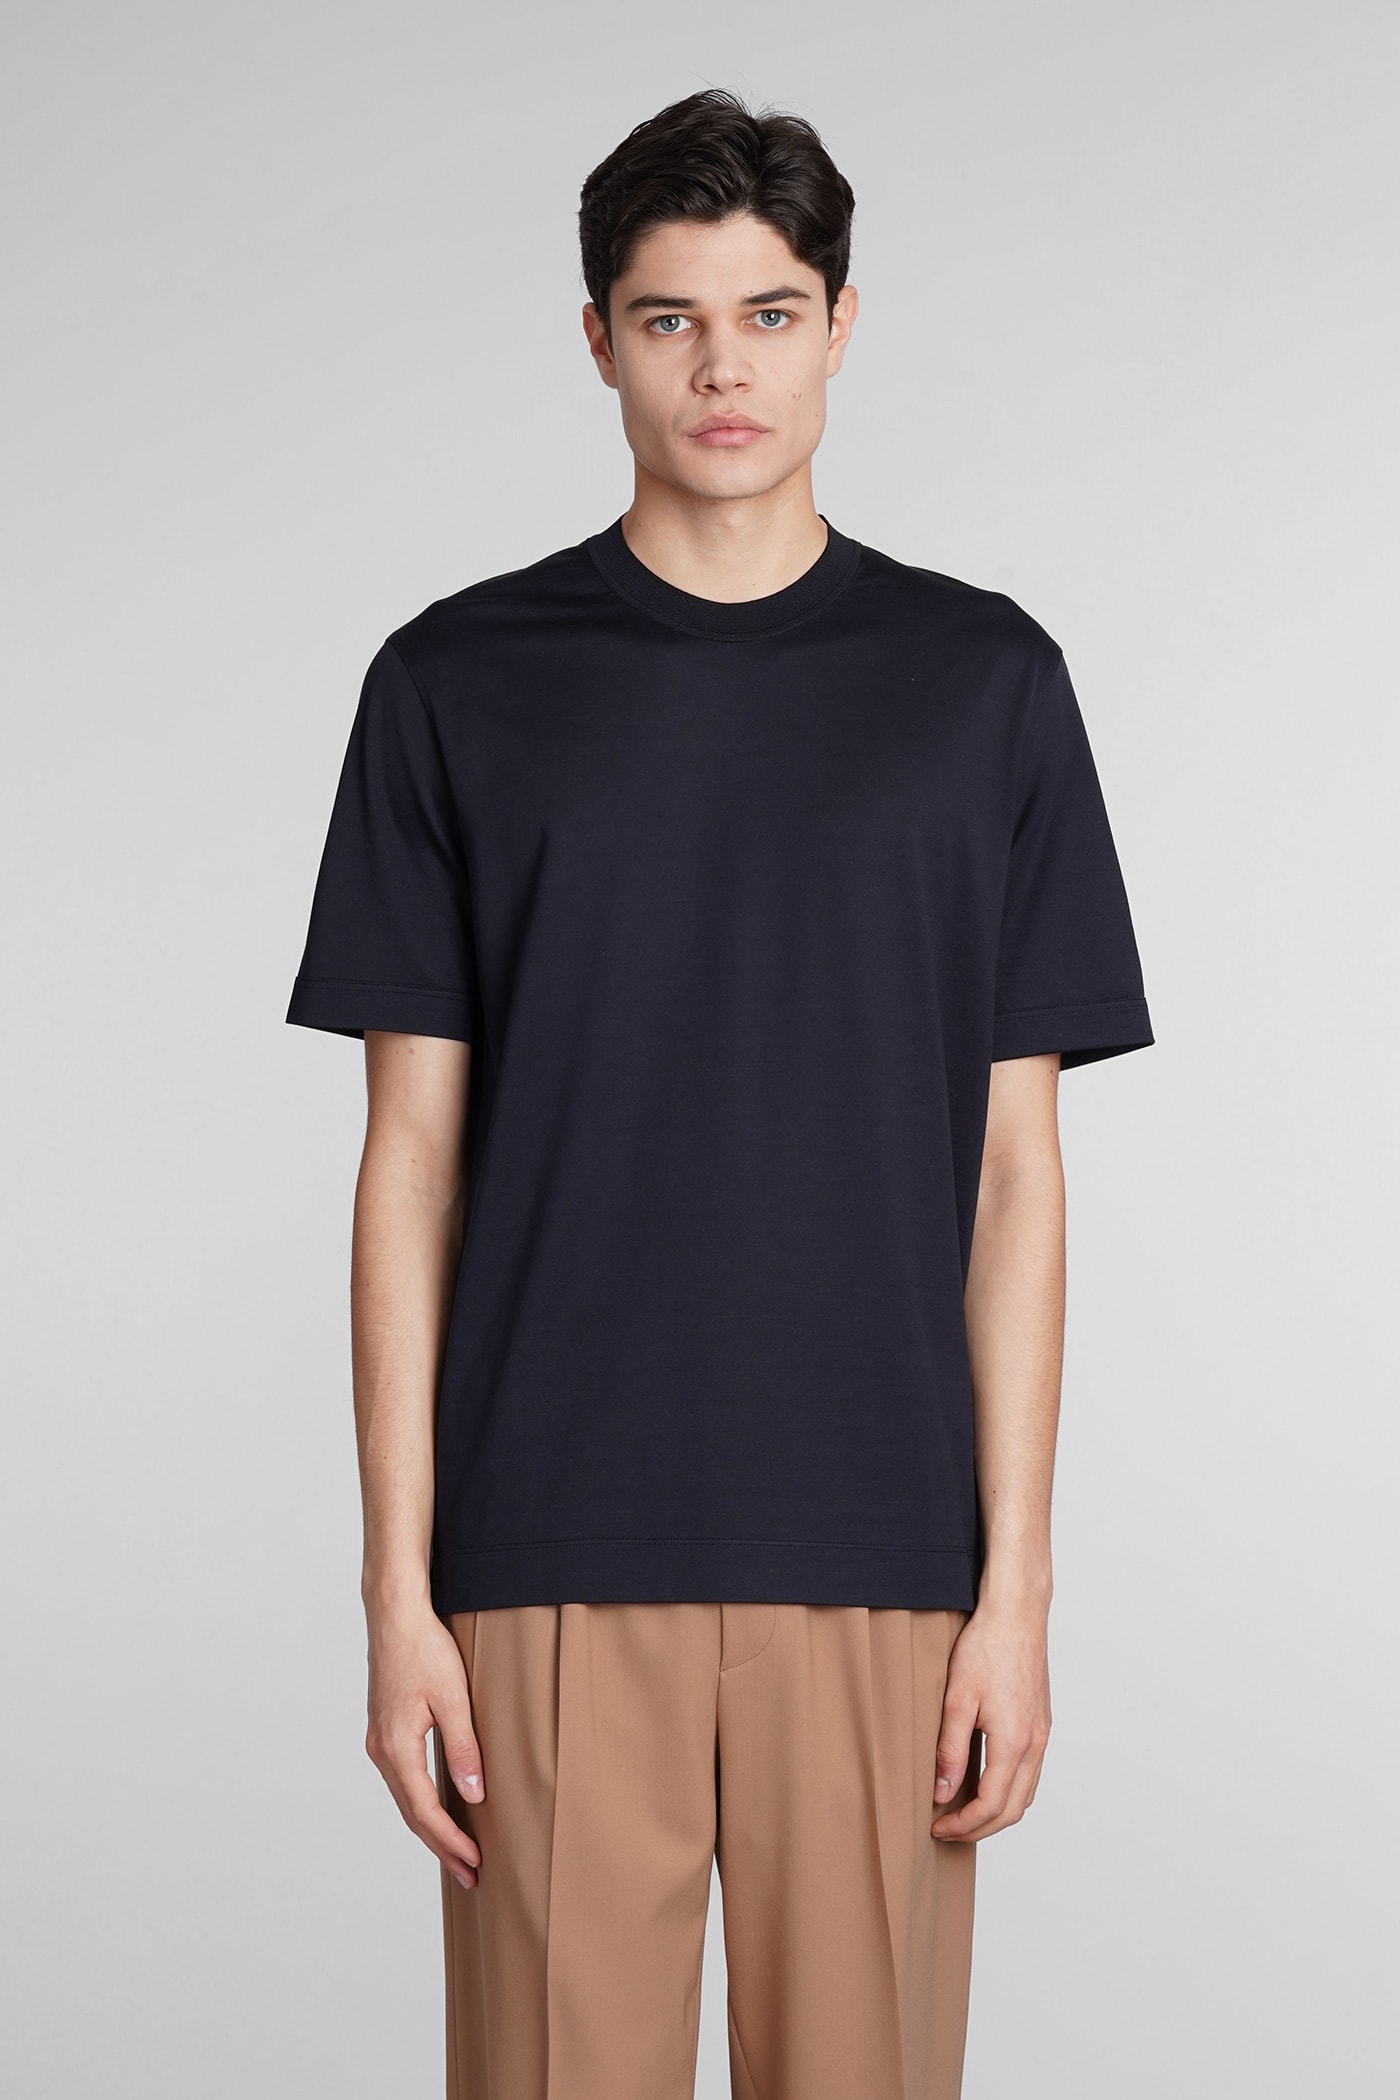 Zegna T-shirt In Blue Cotton